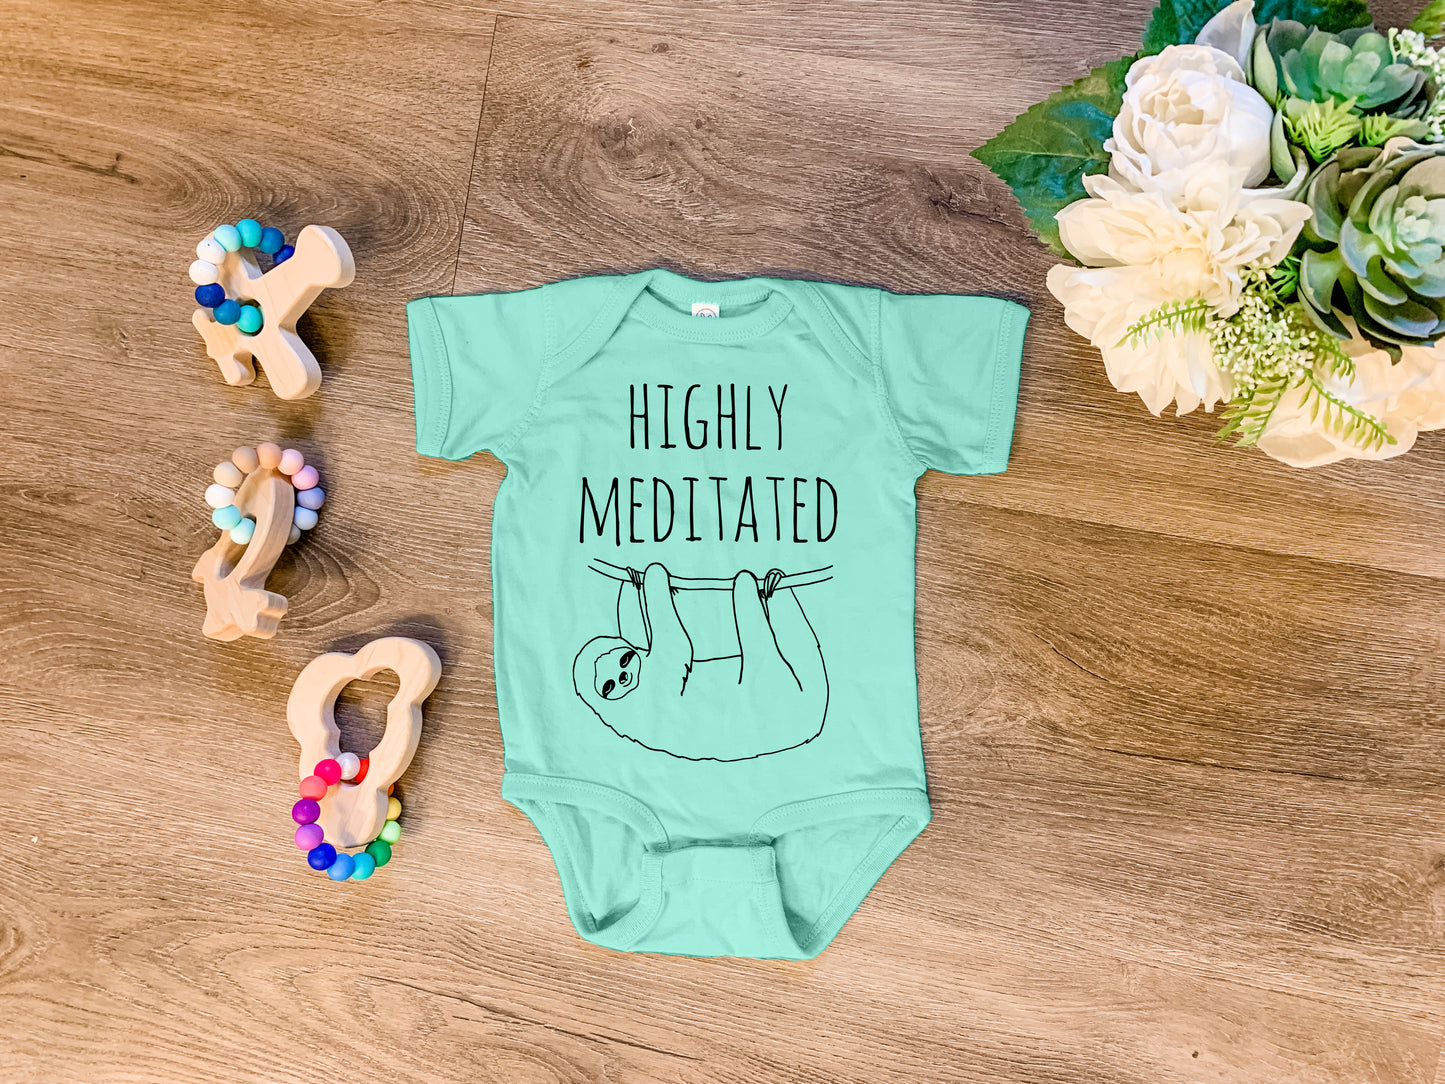 Highly Meditated (Sloth) - Onesie - Heather Gray, Chill, or Lavender